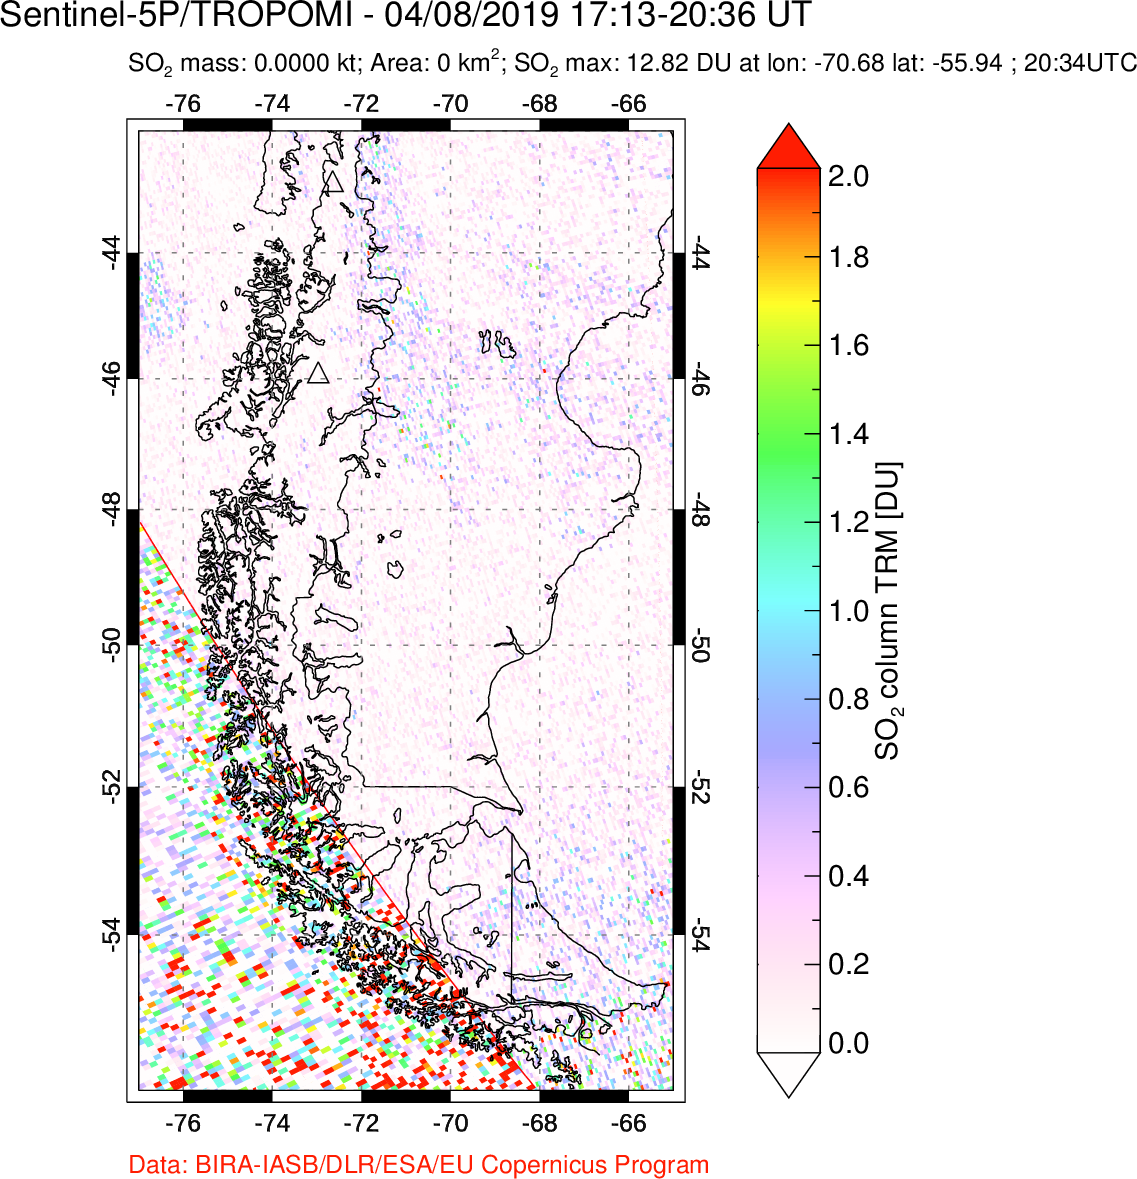 A sulfur dioxide image over Southern Chile on Apr 08, 2019.